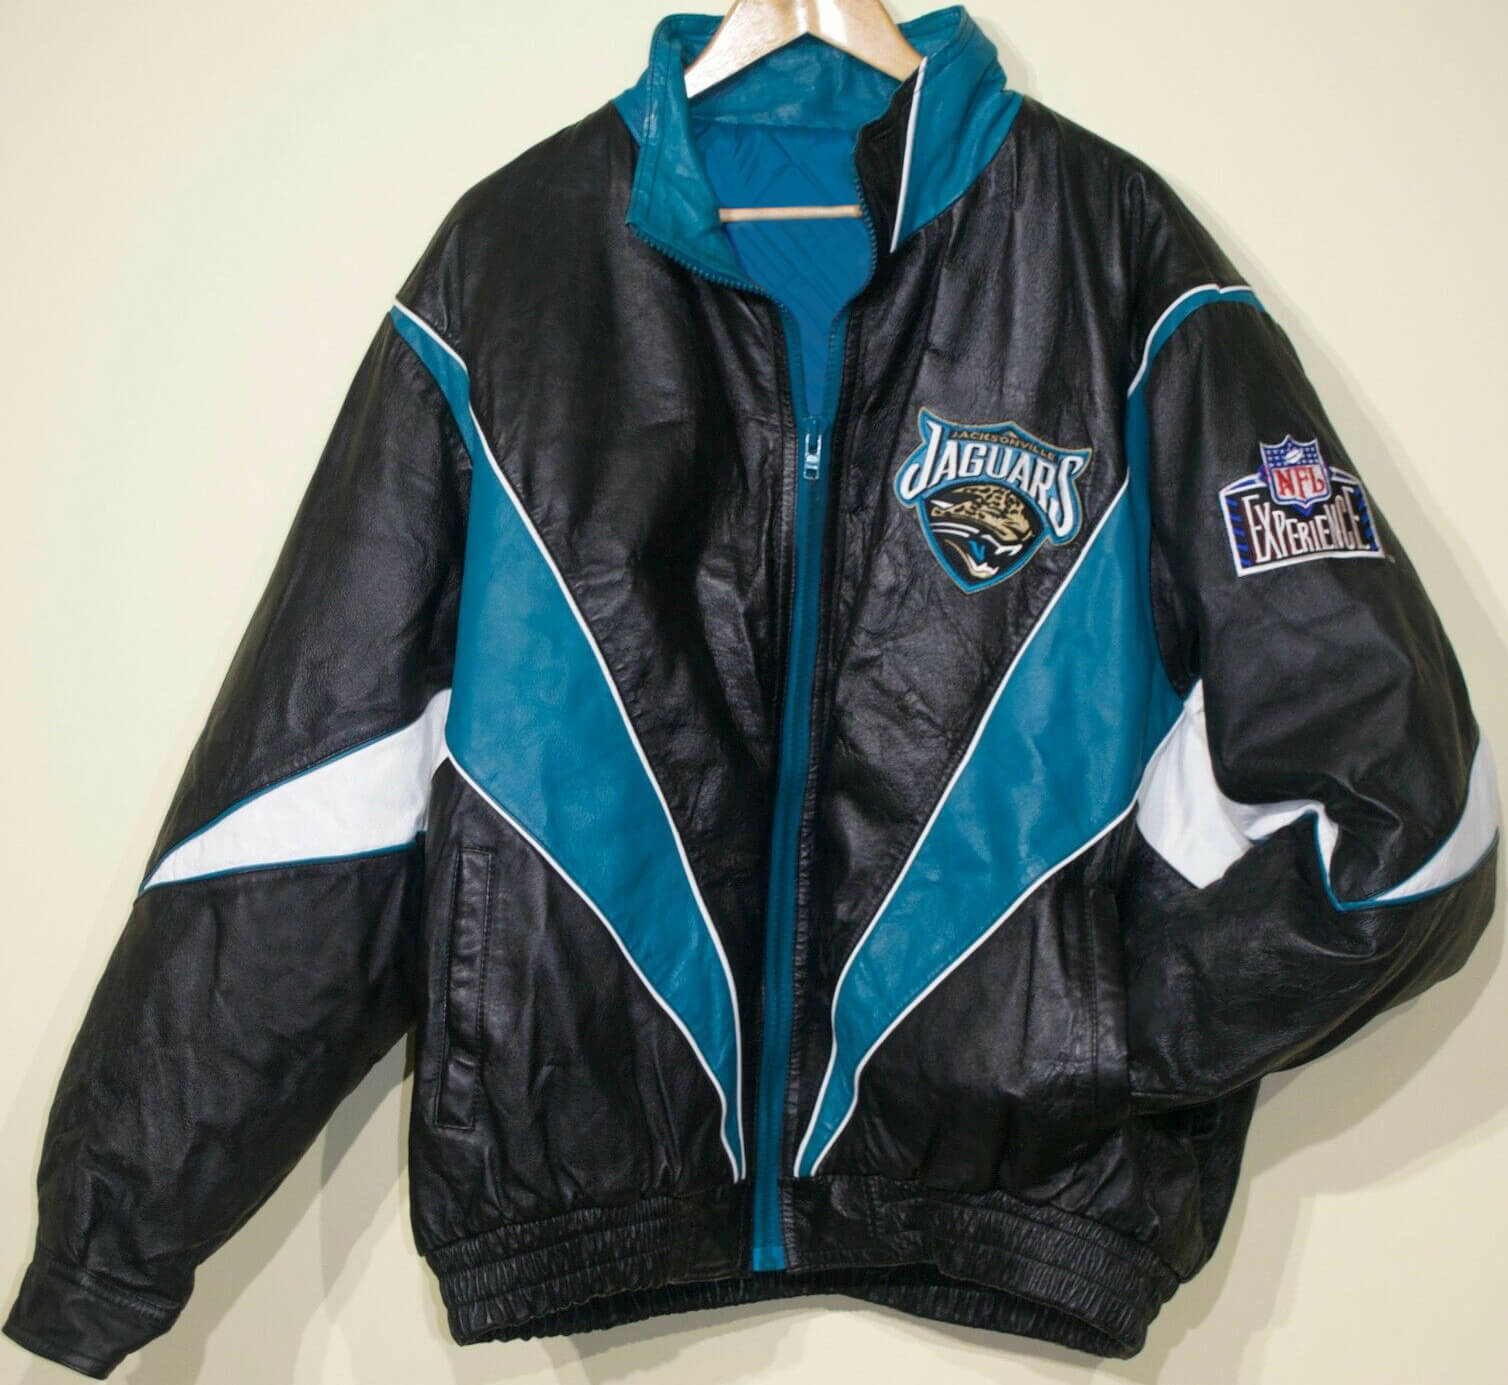 Eagles players receive limited edition Starter jackets with retro logo